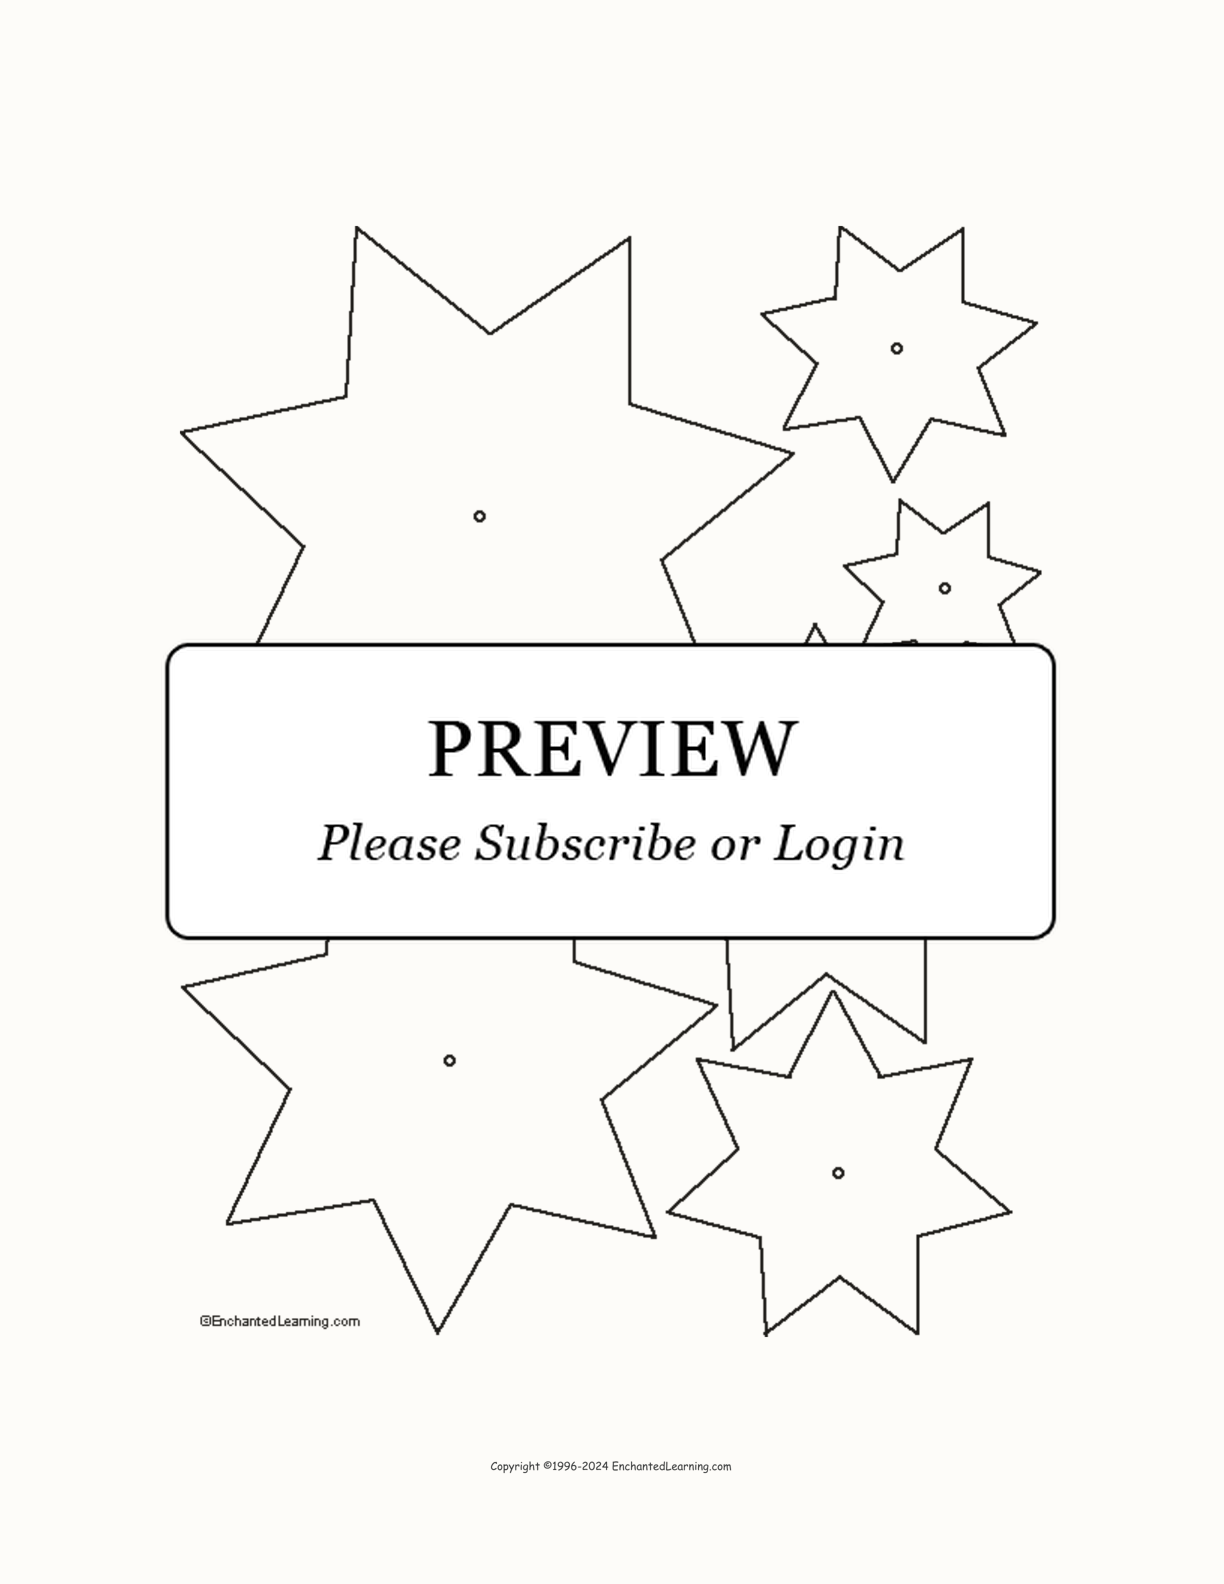 Cascade of Stars Template interactive printout page 1